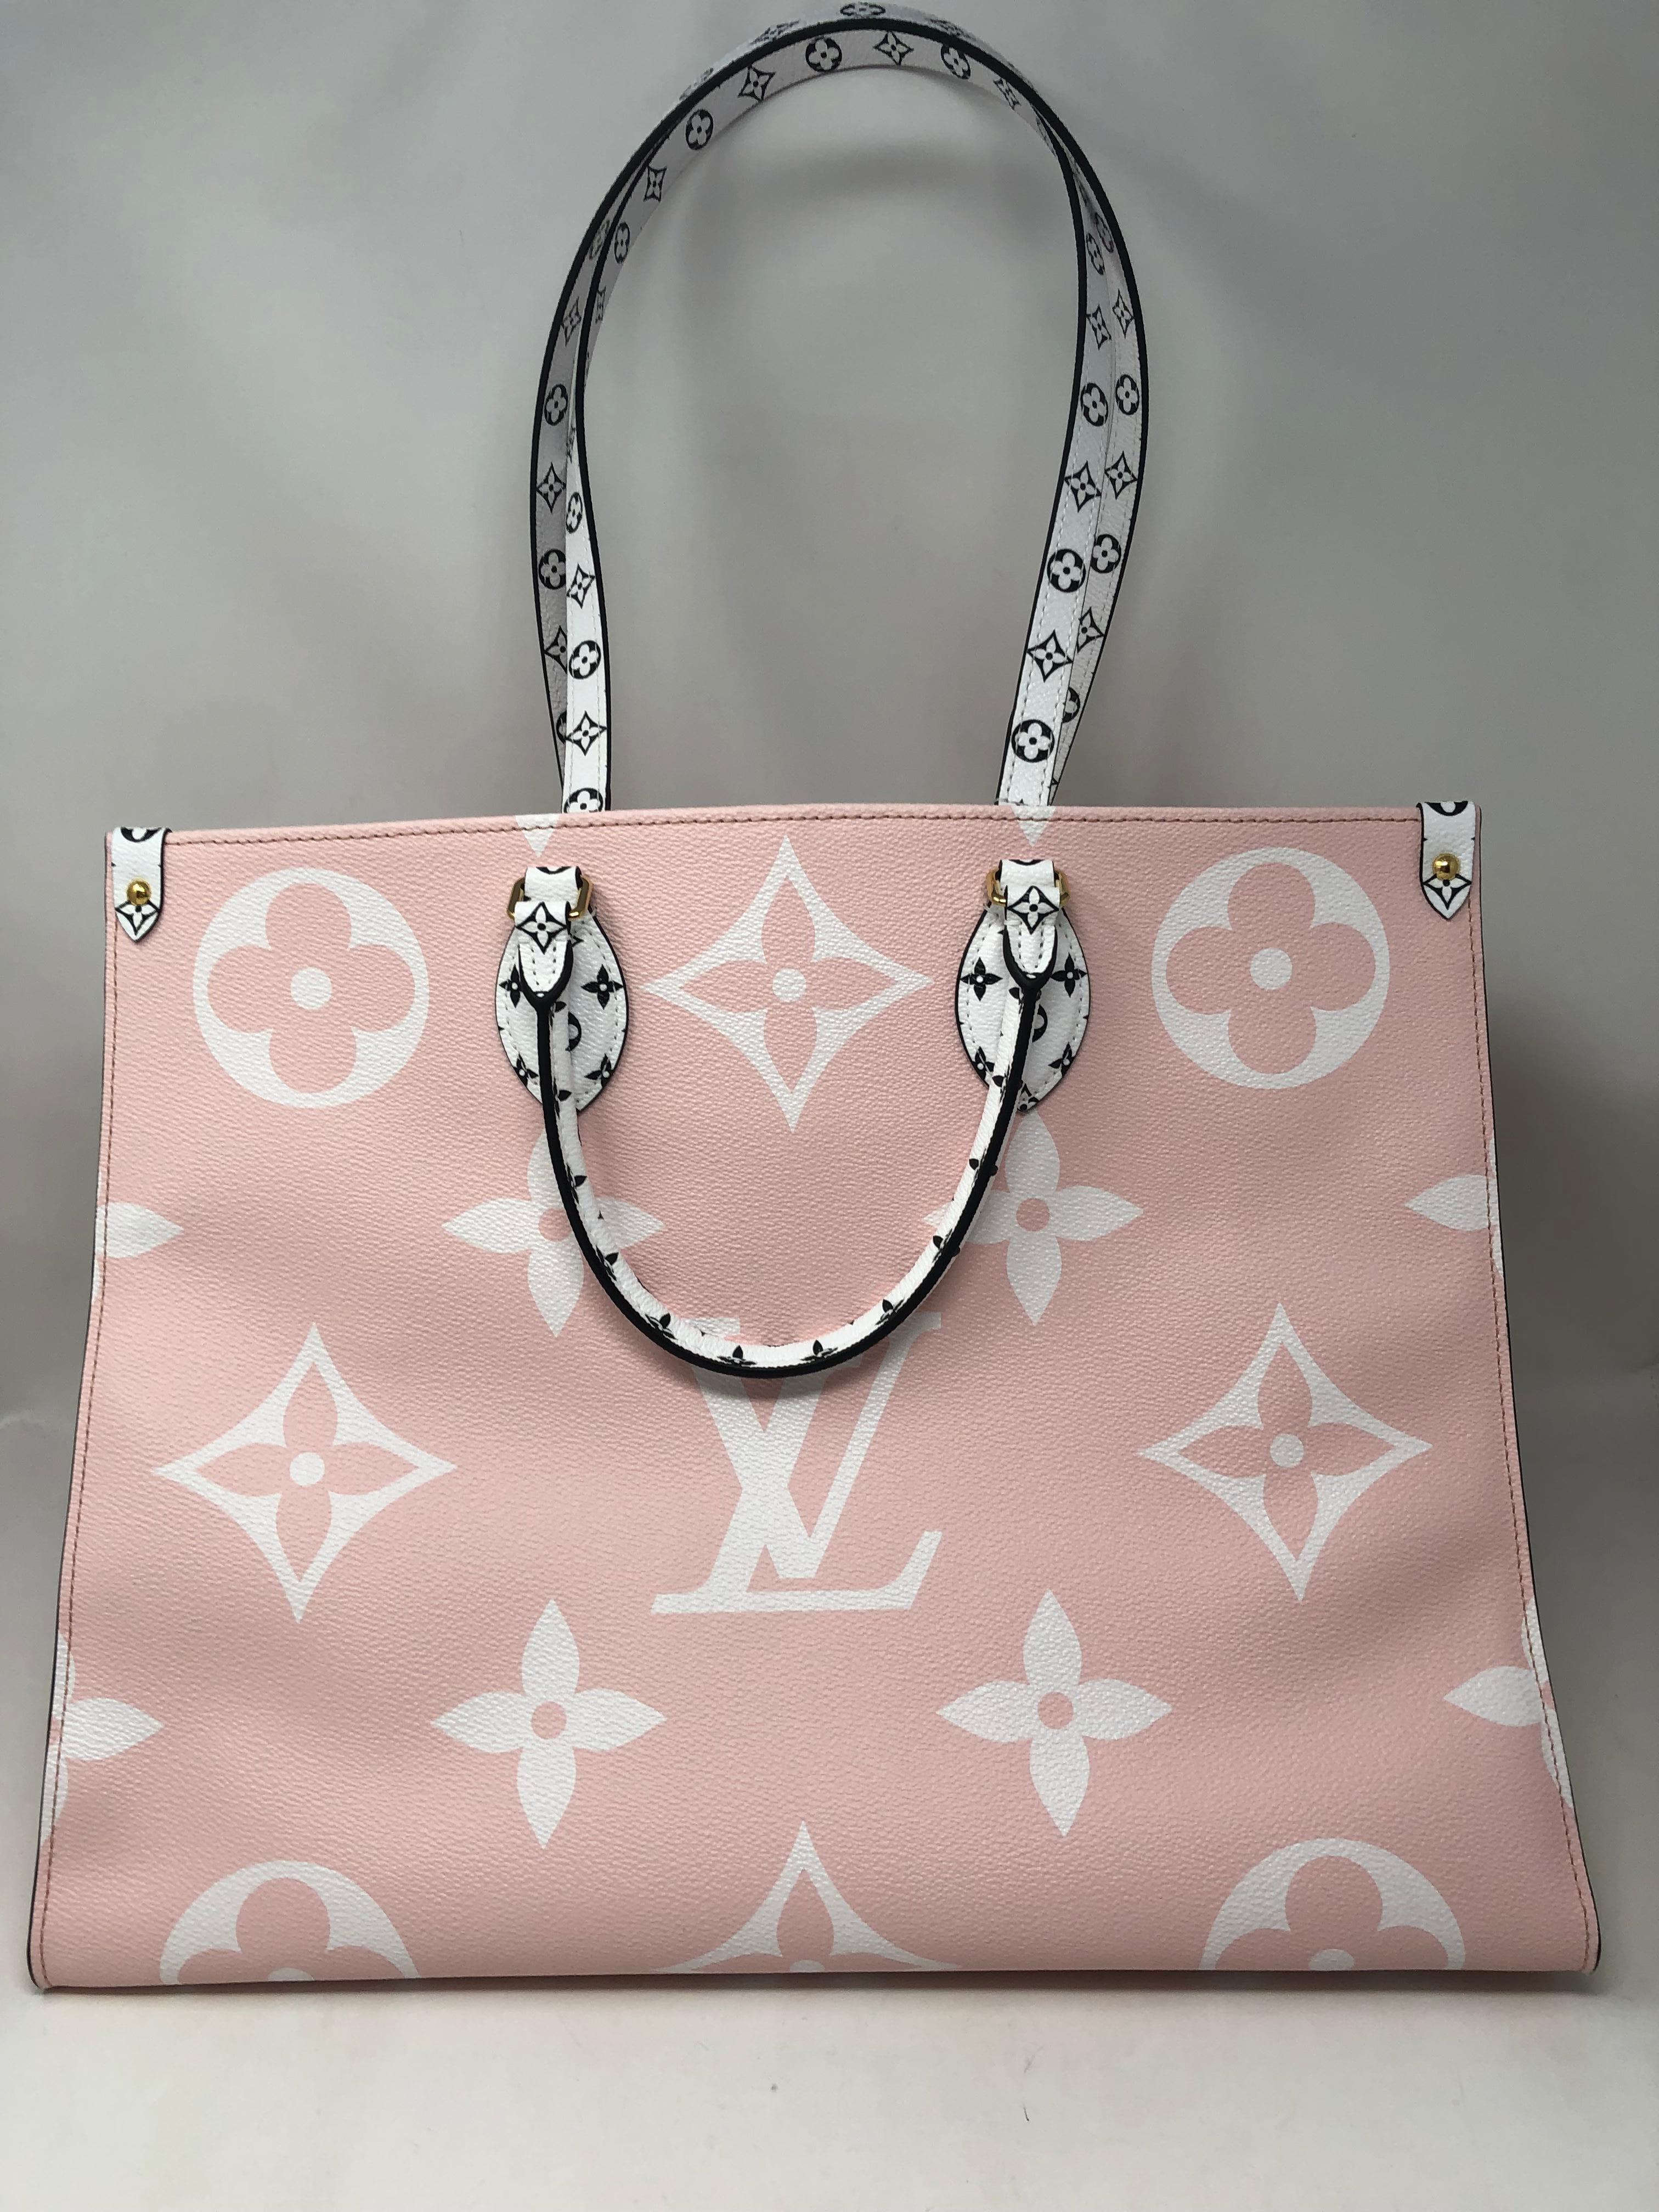 Louis Vuitton On The Go Tote Bag with Red, Pink, Yellow, Orange, and White. Rare and very limited bag. Brand new never used. Big Monogram collection. Don't miss out. Guaranteed authentic. 